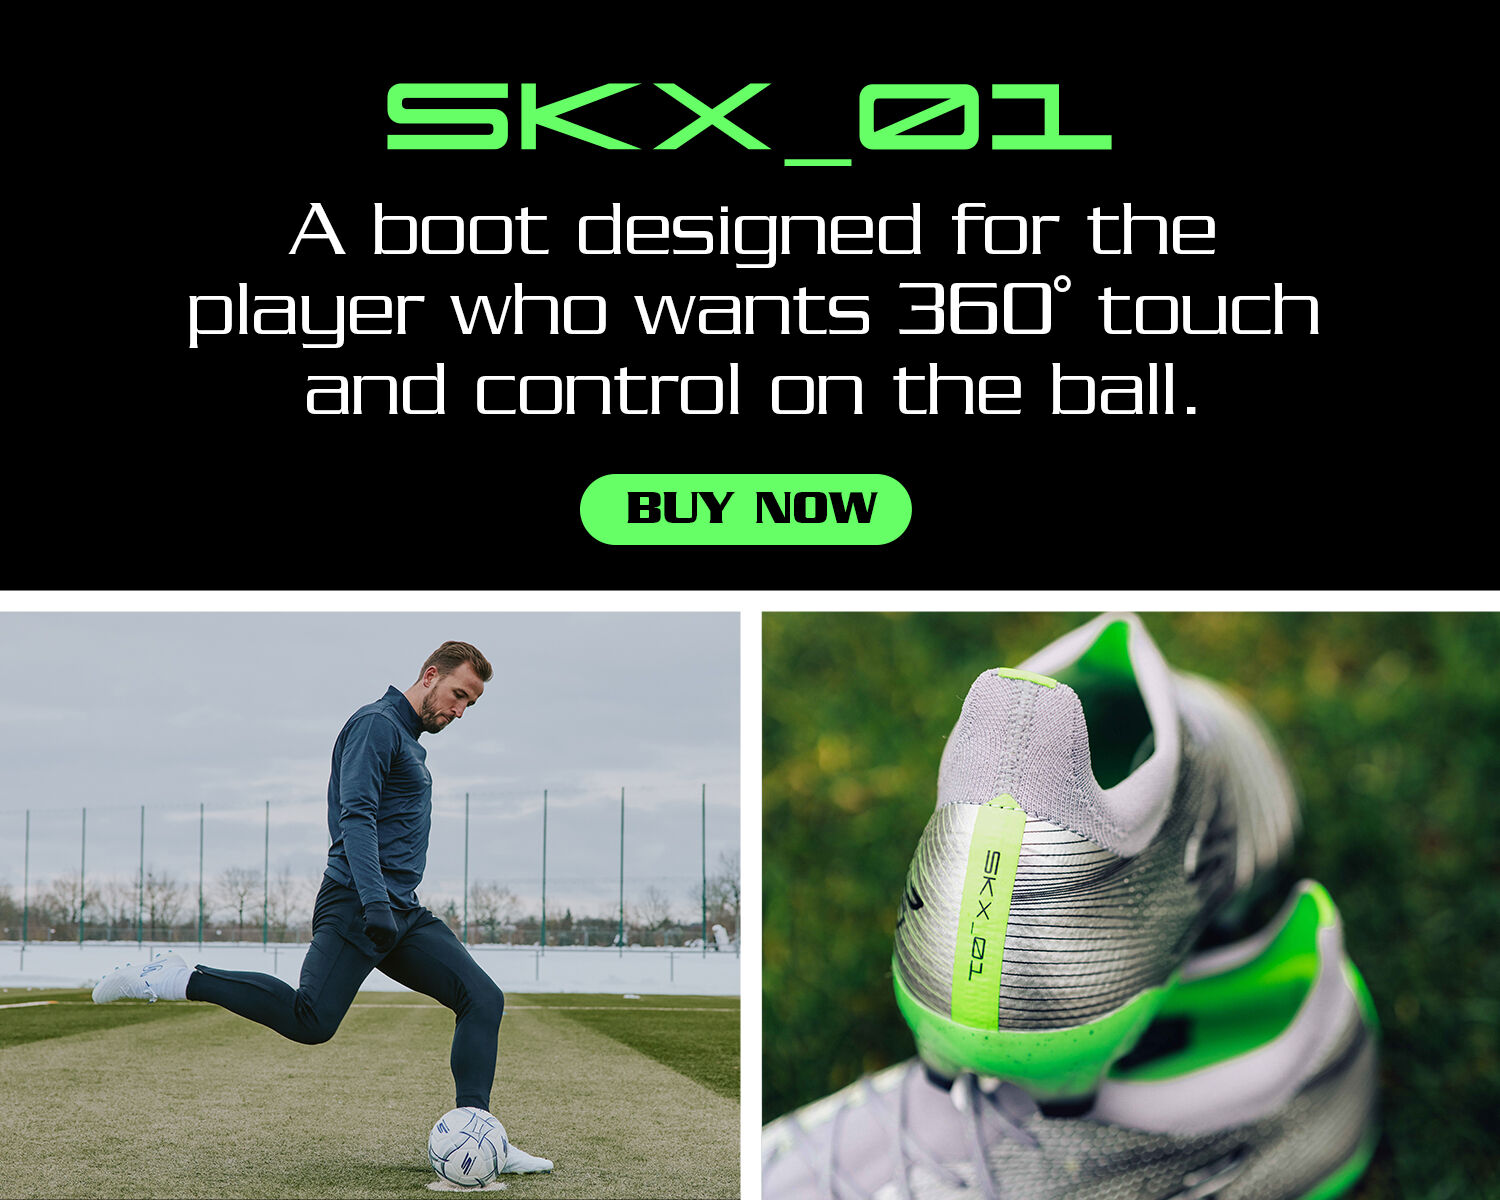 Laser-Comfort SKX_01 Football. A boot designed for the player who eants 360 touch and control on the ball.